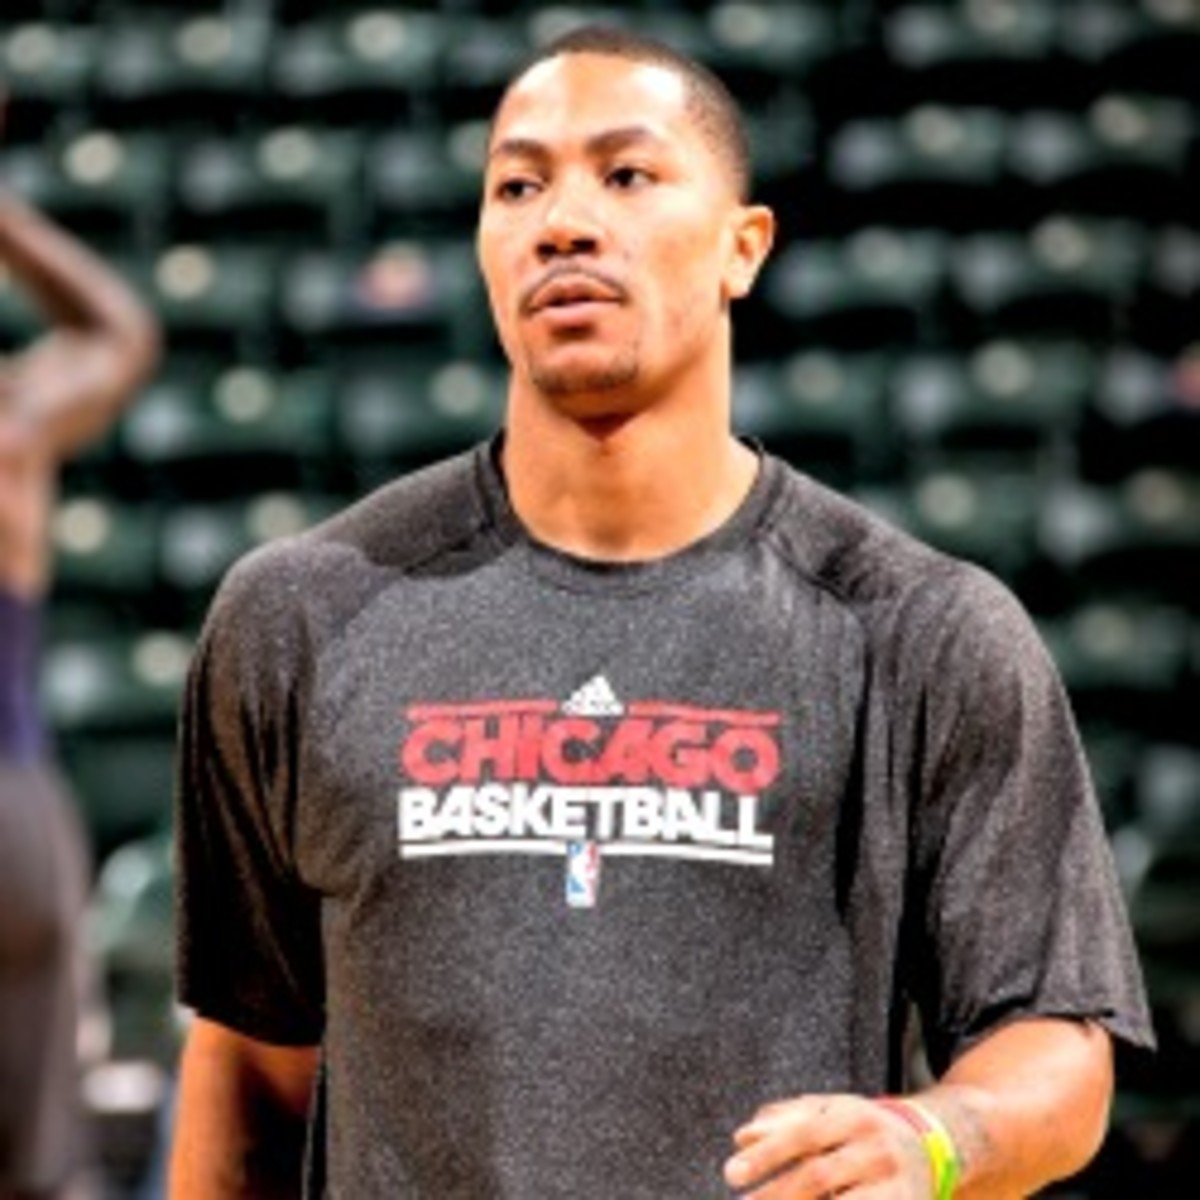 Bulls guard Derrick Rose could soon return to action. (Ron Hoskins/NBA/Getty Images)